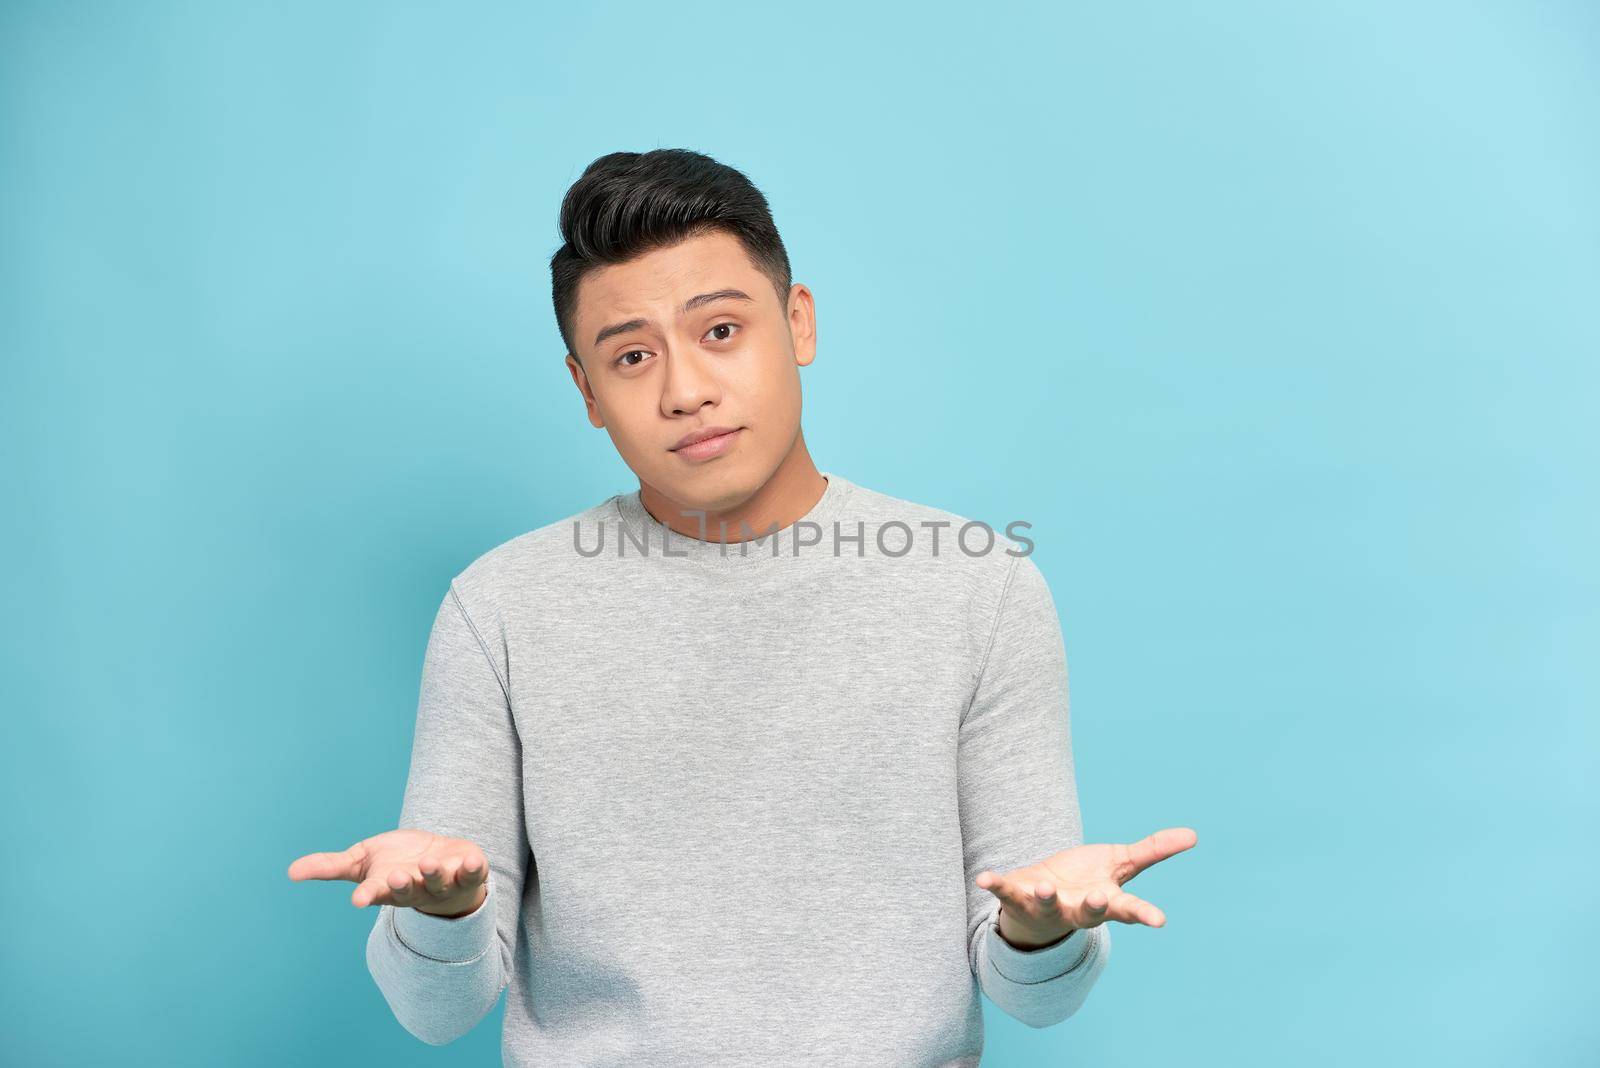 Young handsome man against a white background celebrating a victory or success, he is surprised and shocked.